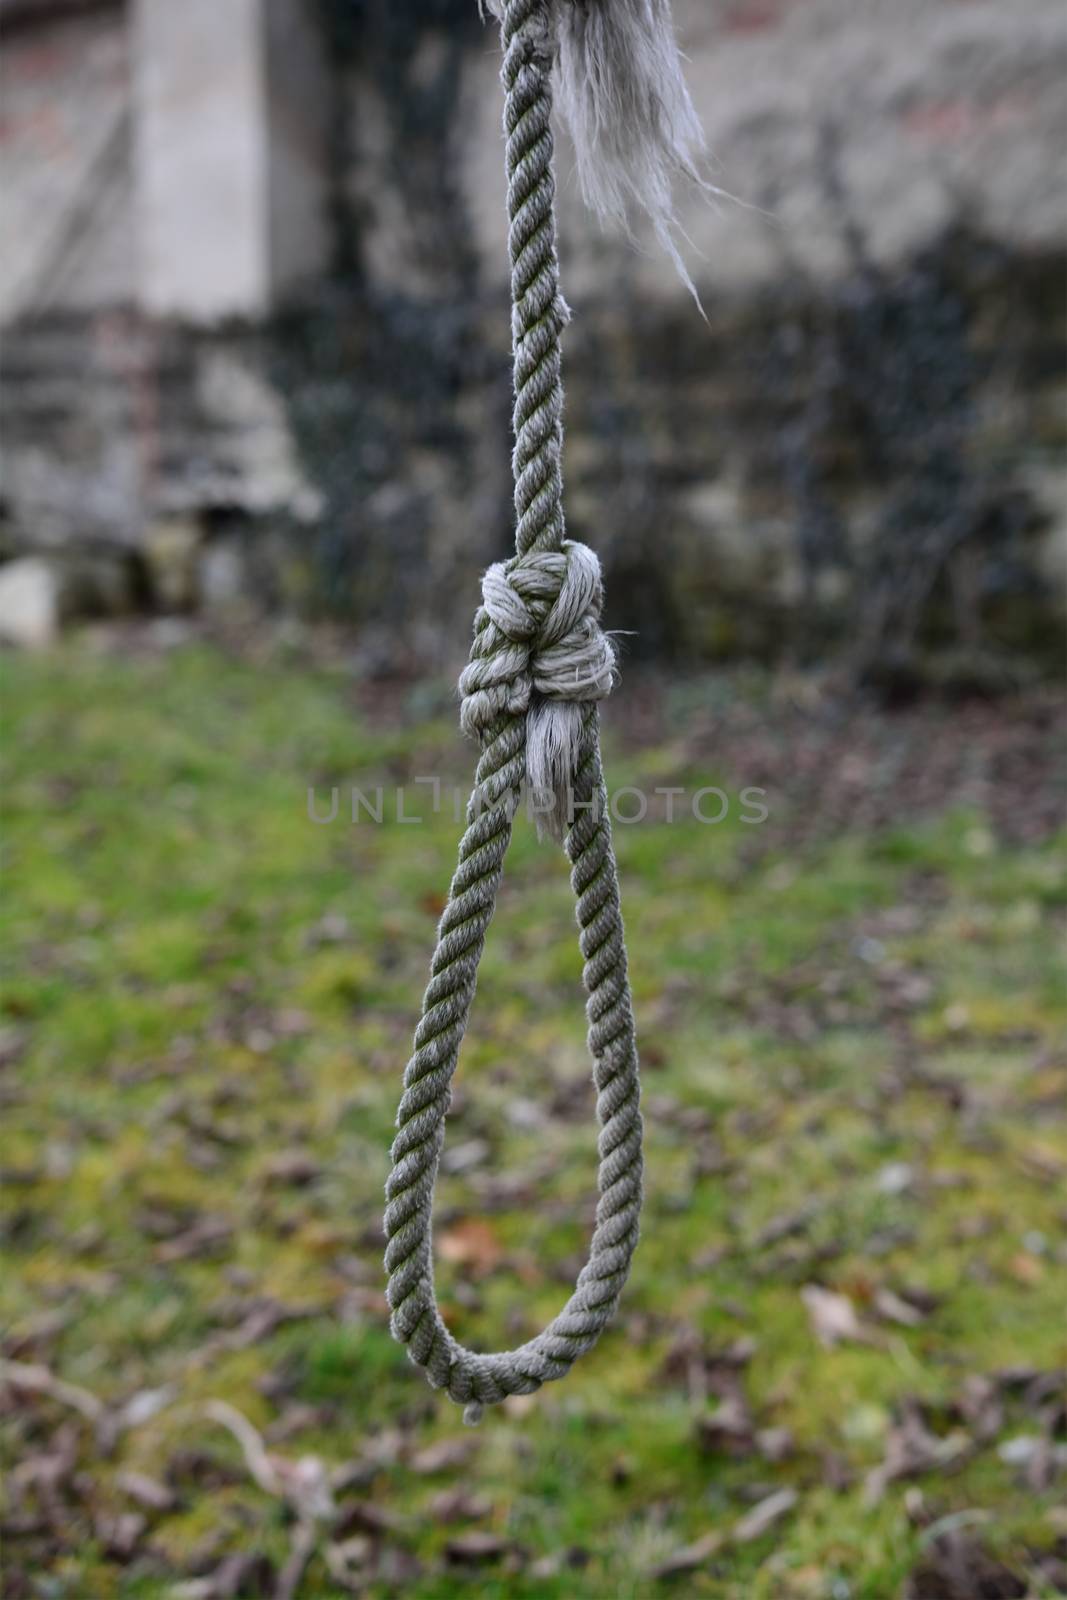 Gallows on a tree in the garden by neryx